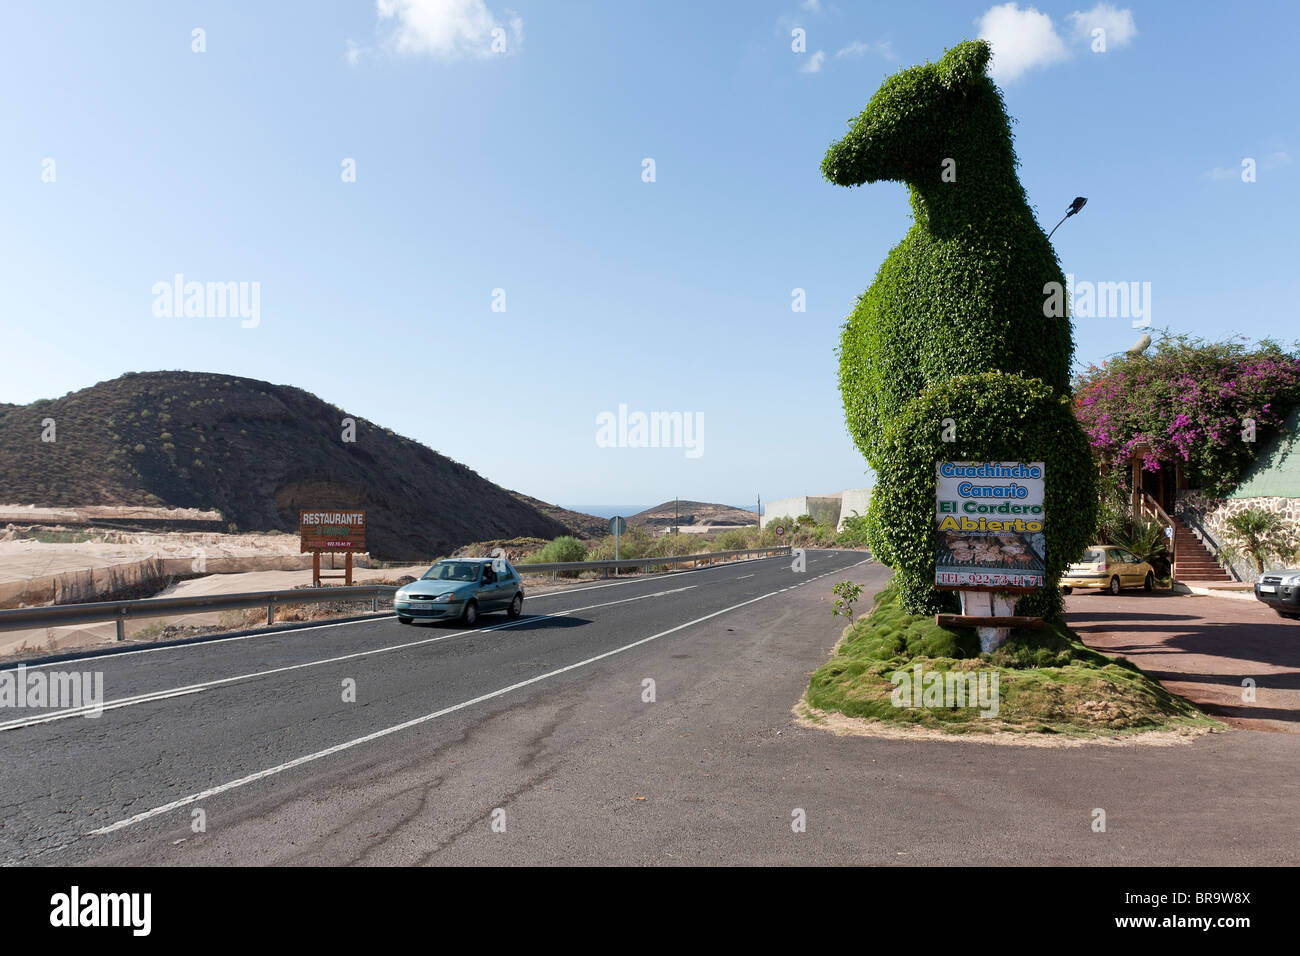 A group of trees trimmed into the shape of a giant lamb topiary to advertise a restaurant at Guargacho in Tenerife Stock Photo